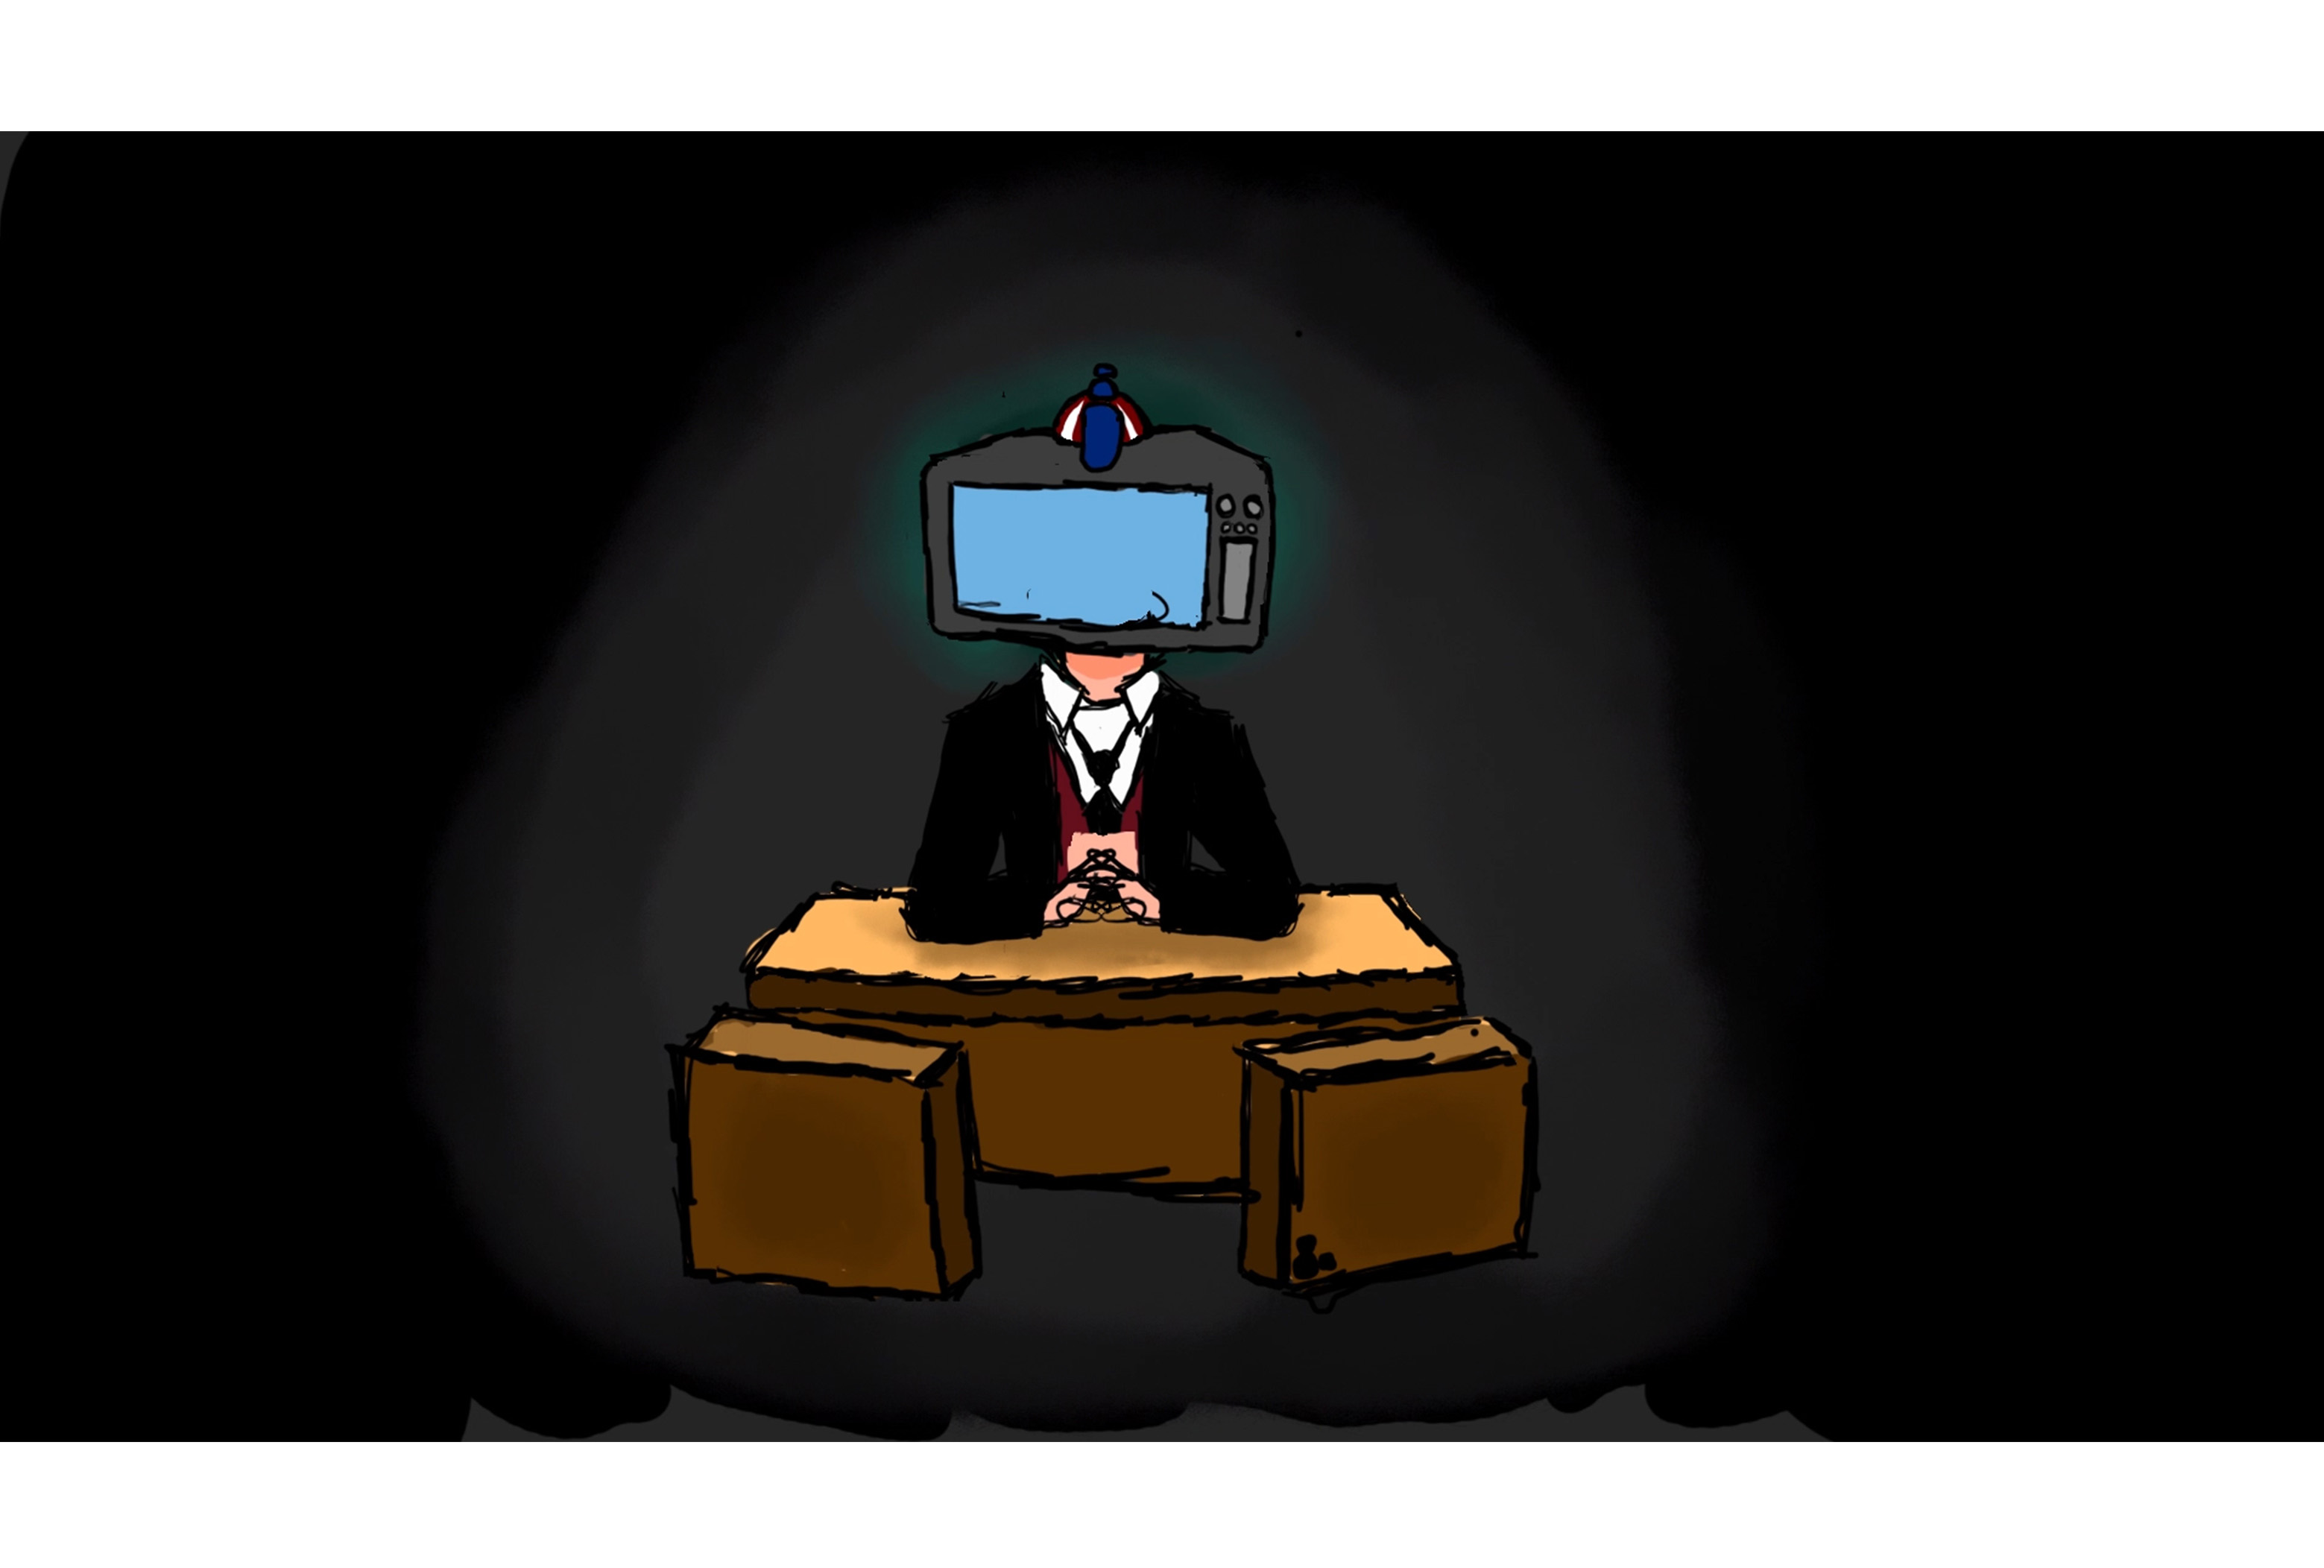  / Still of a character representation of corporate greed, complete with a TV head and spinny beanie. Animation was made in Toon Boom Harmony.